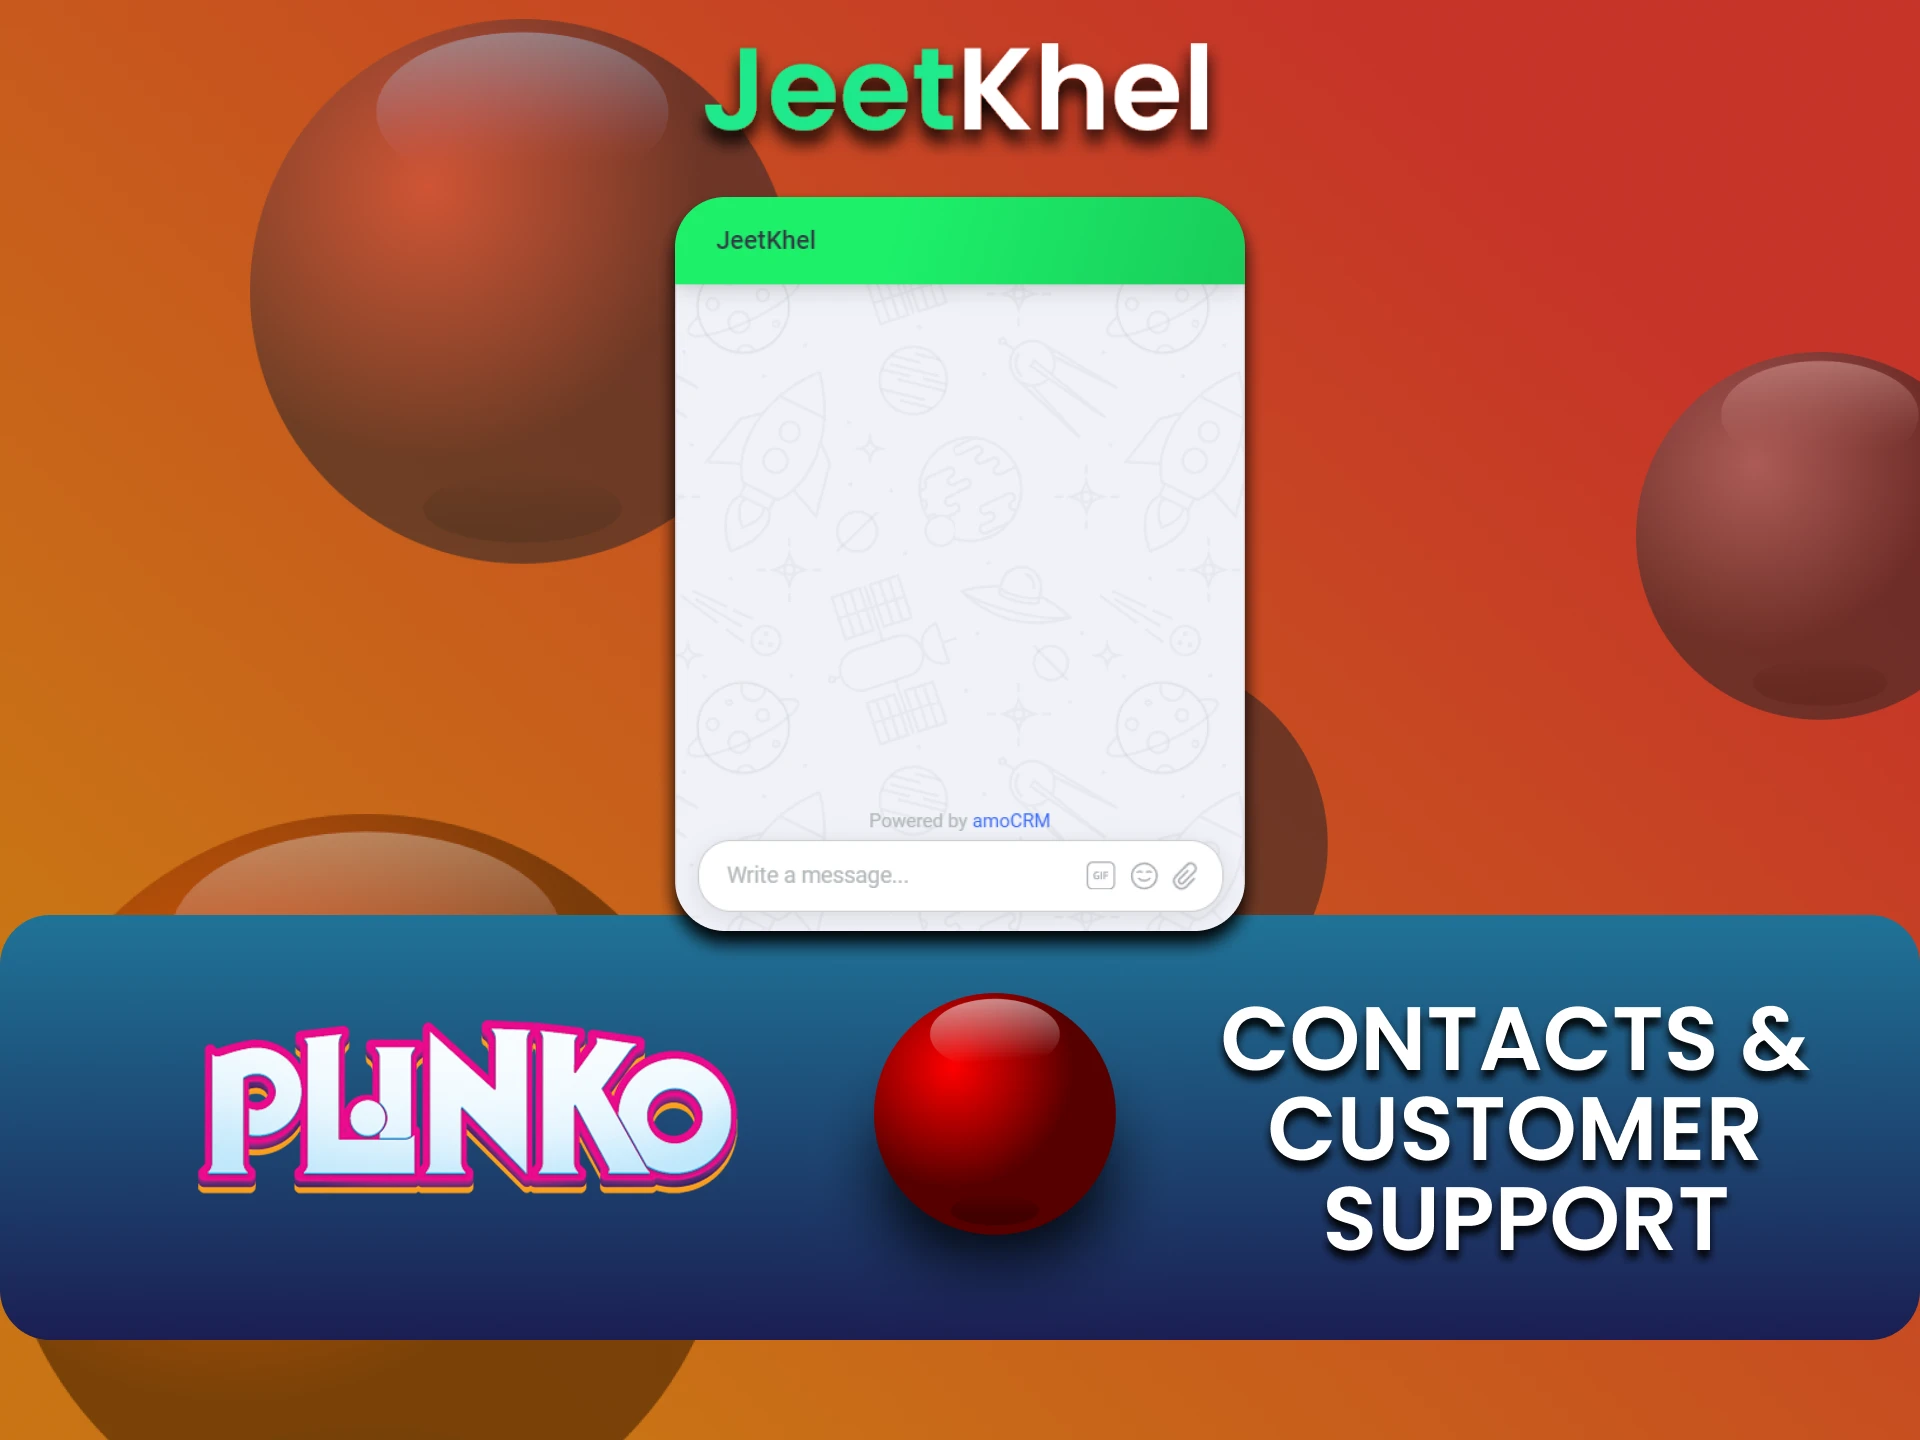 You can contact the JeetKhel team in one of the convenient ways.